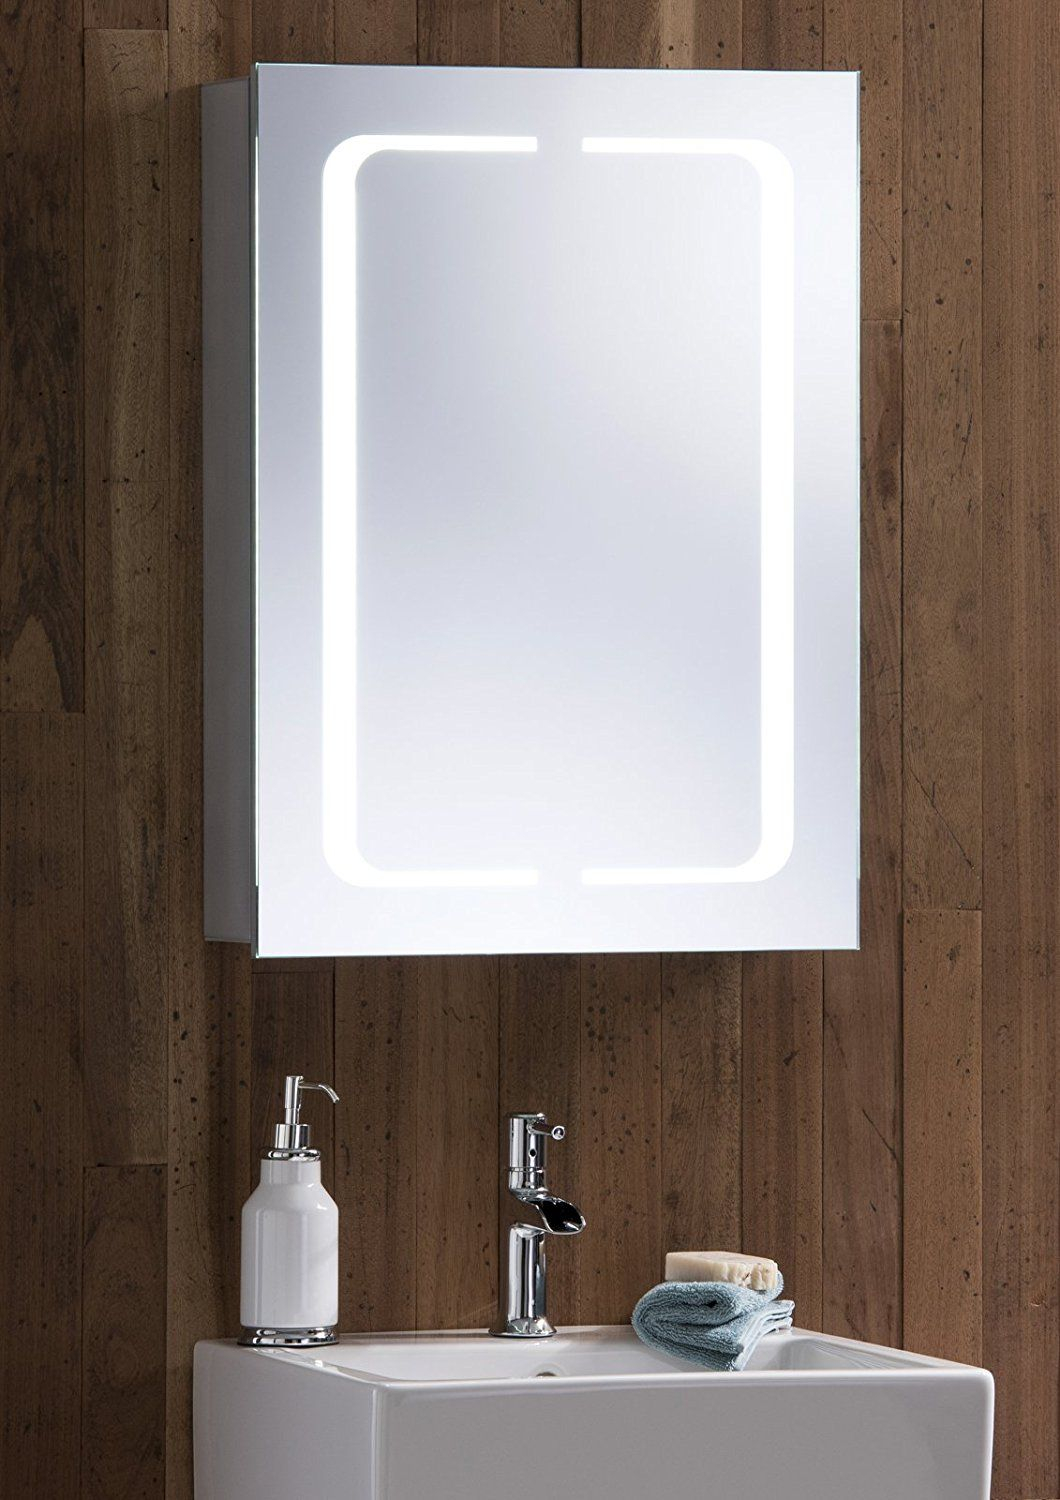 Led Illuminated Bathroom Mirror Cabinet With Demister Heat Pad pertaining to proportions 1060 X 1500